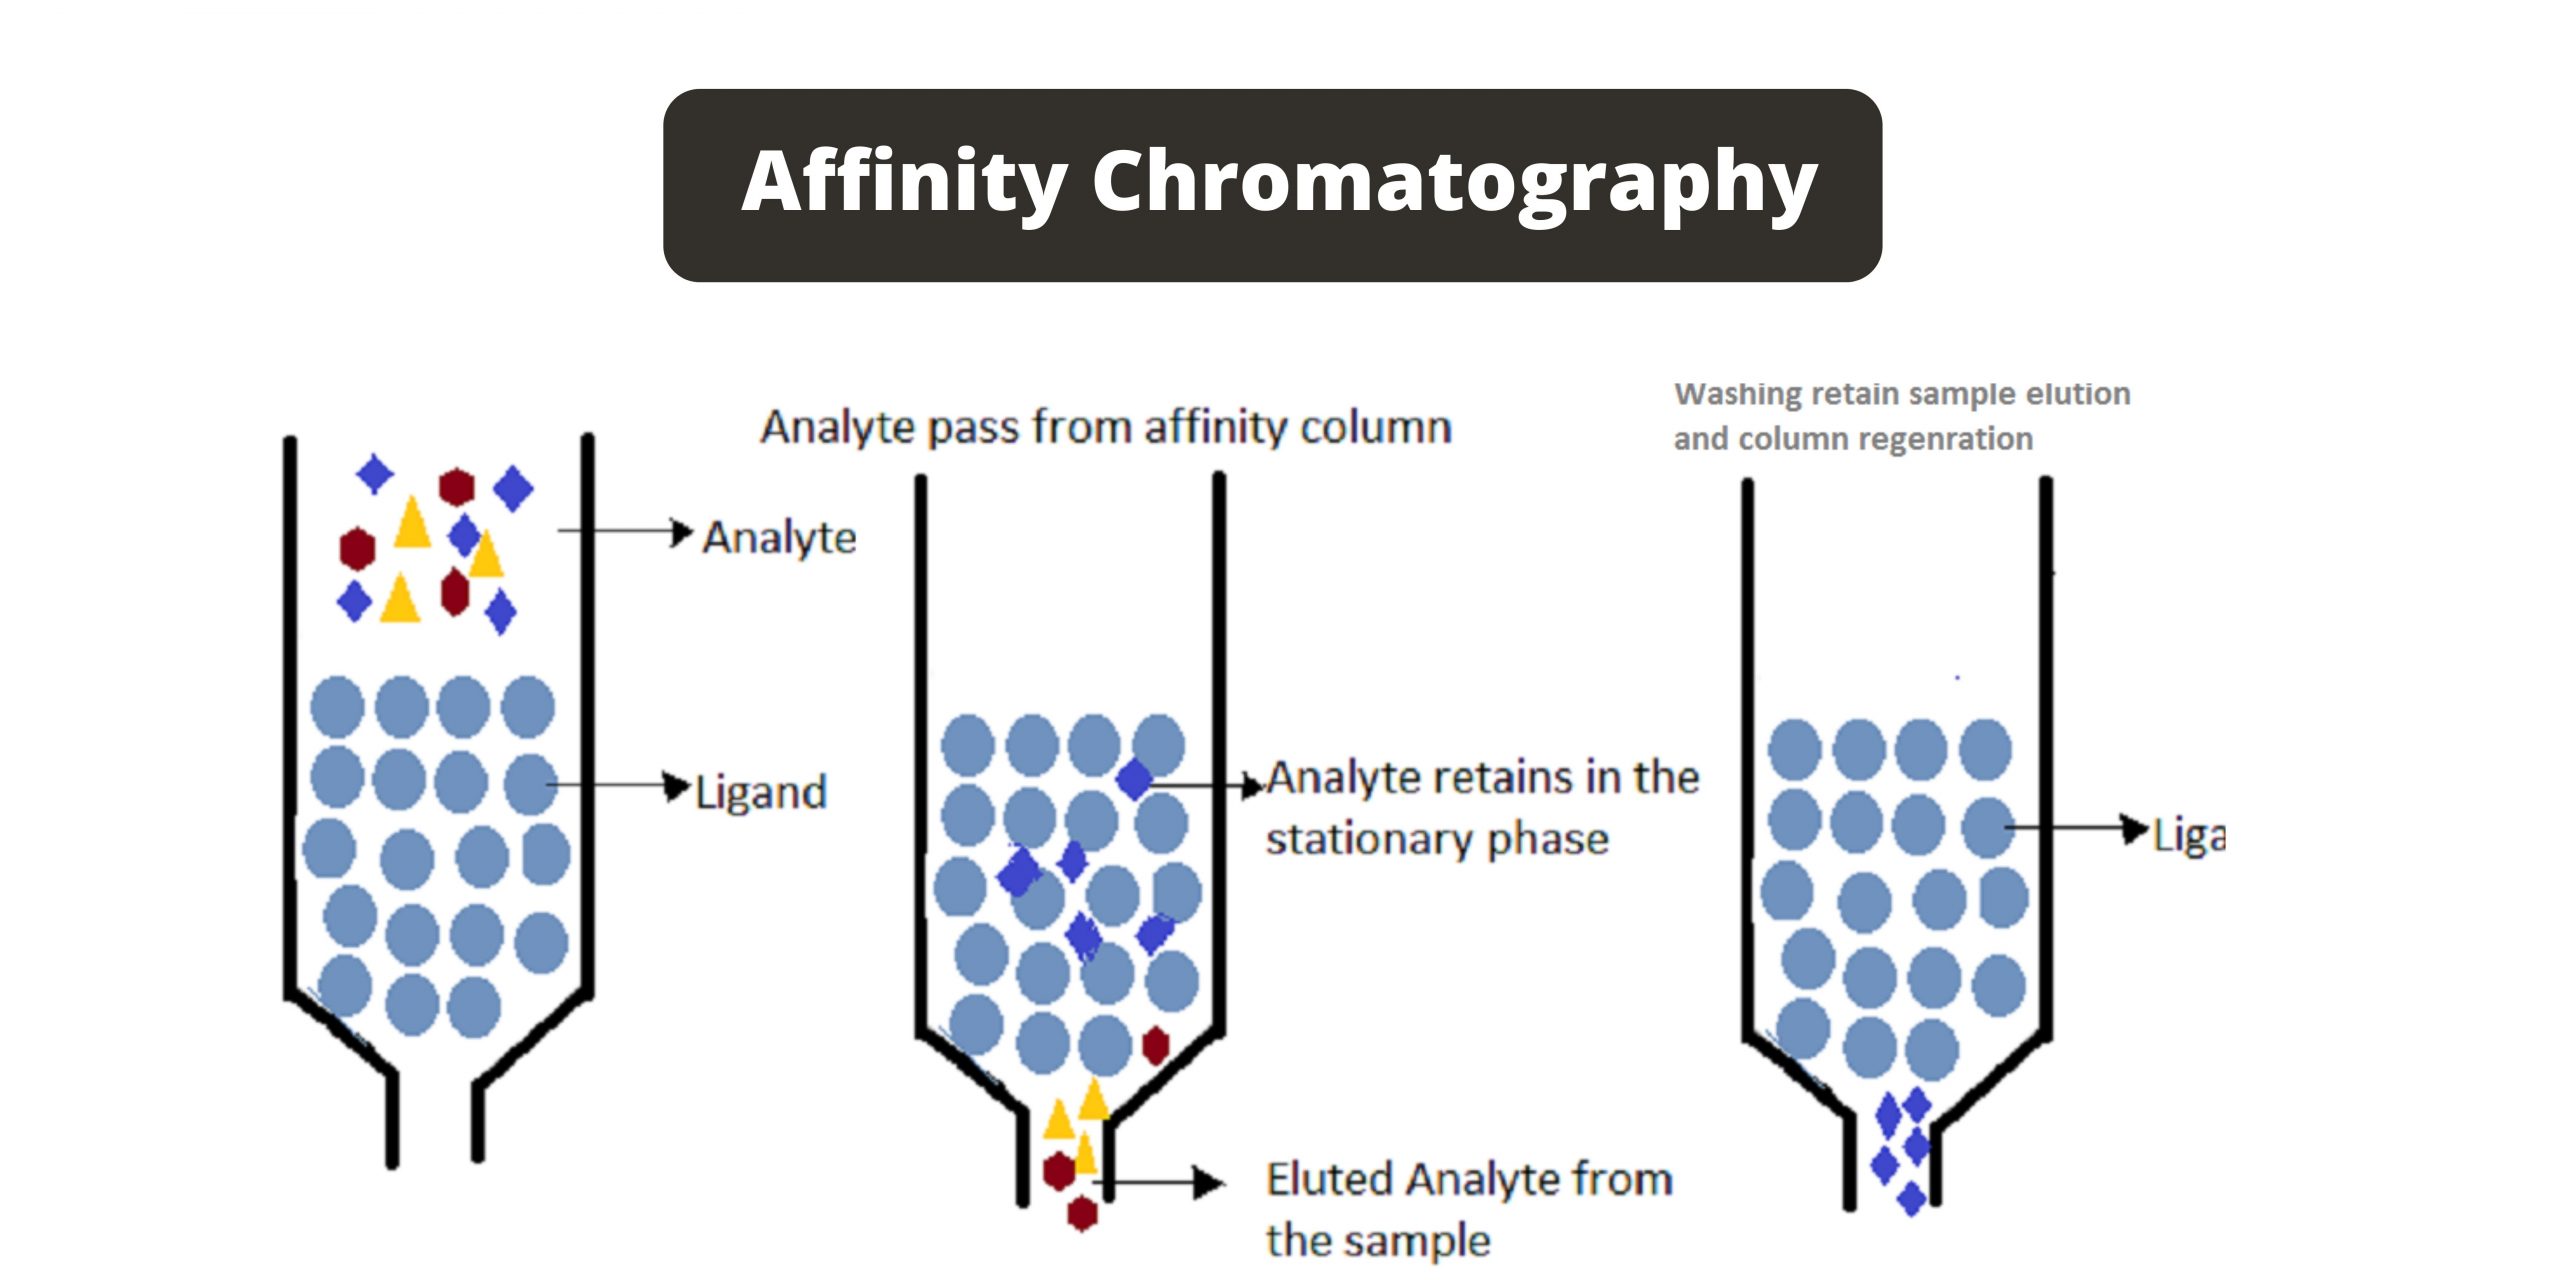 Affinity Chromatography Definition, Principle, Components, Steps, Applications